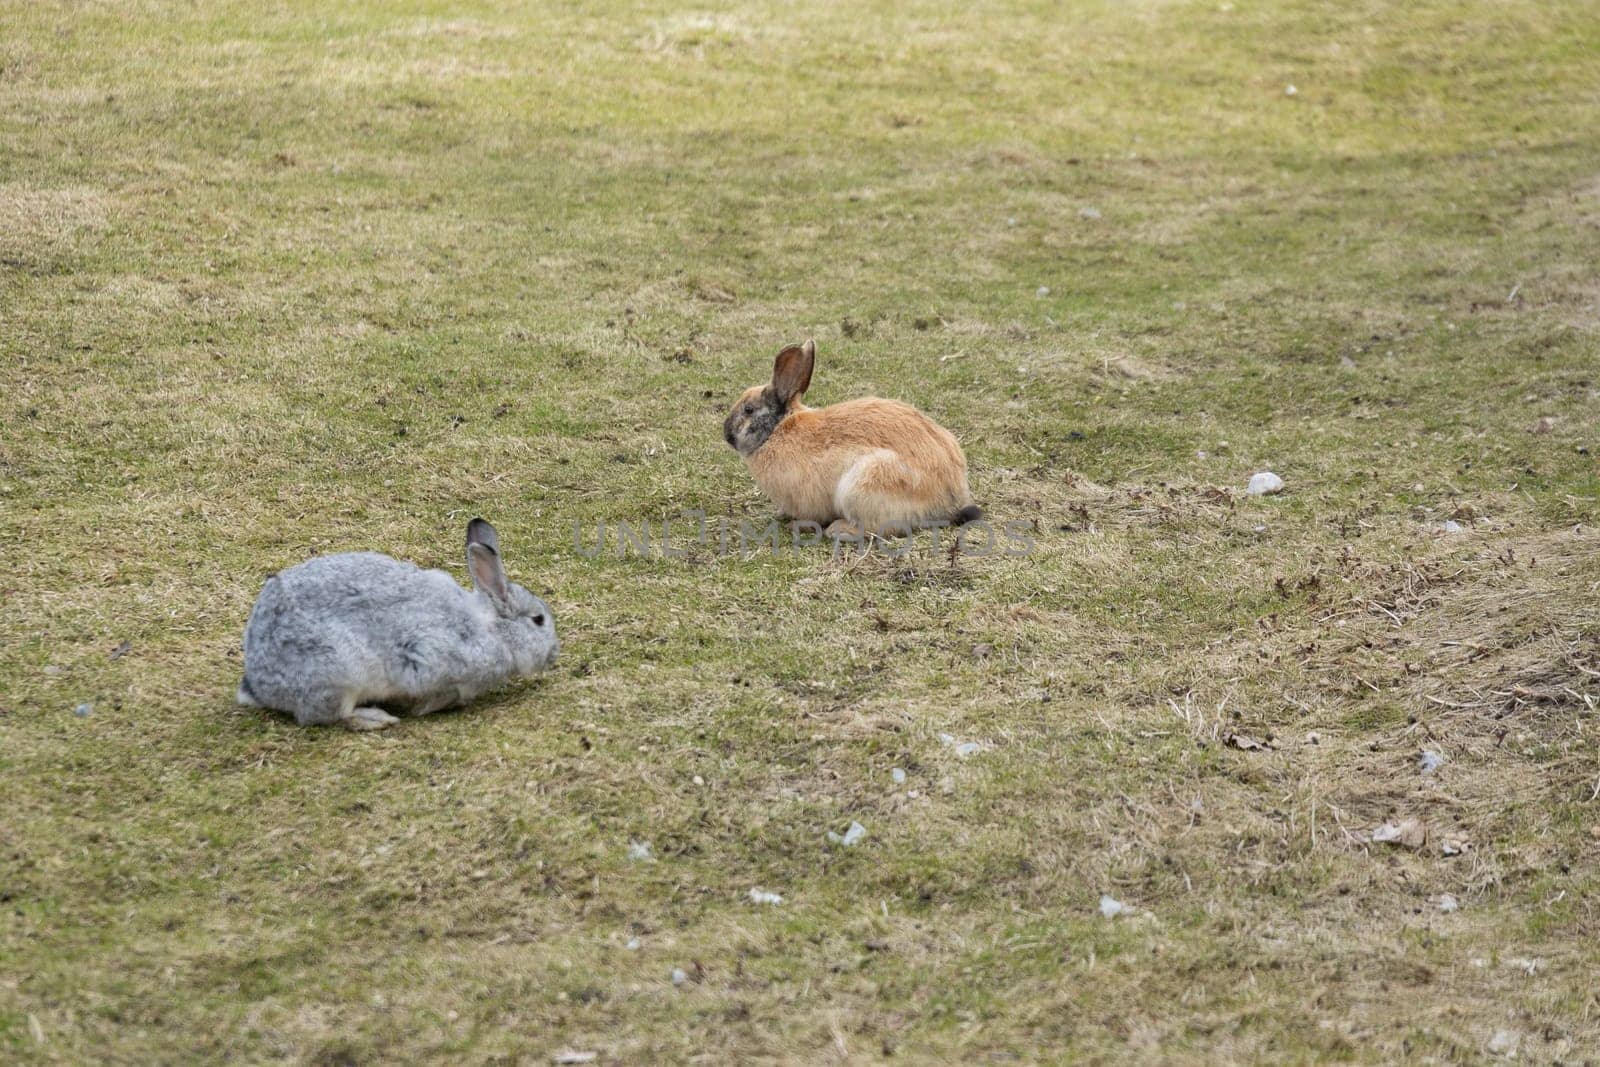 Two rabbits can be seen perched atop a lush field covered in green grass. The rabbits are calmly sitting, their ears perked up, enjoying the peaceful surrounding nature.